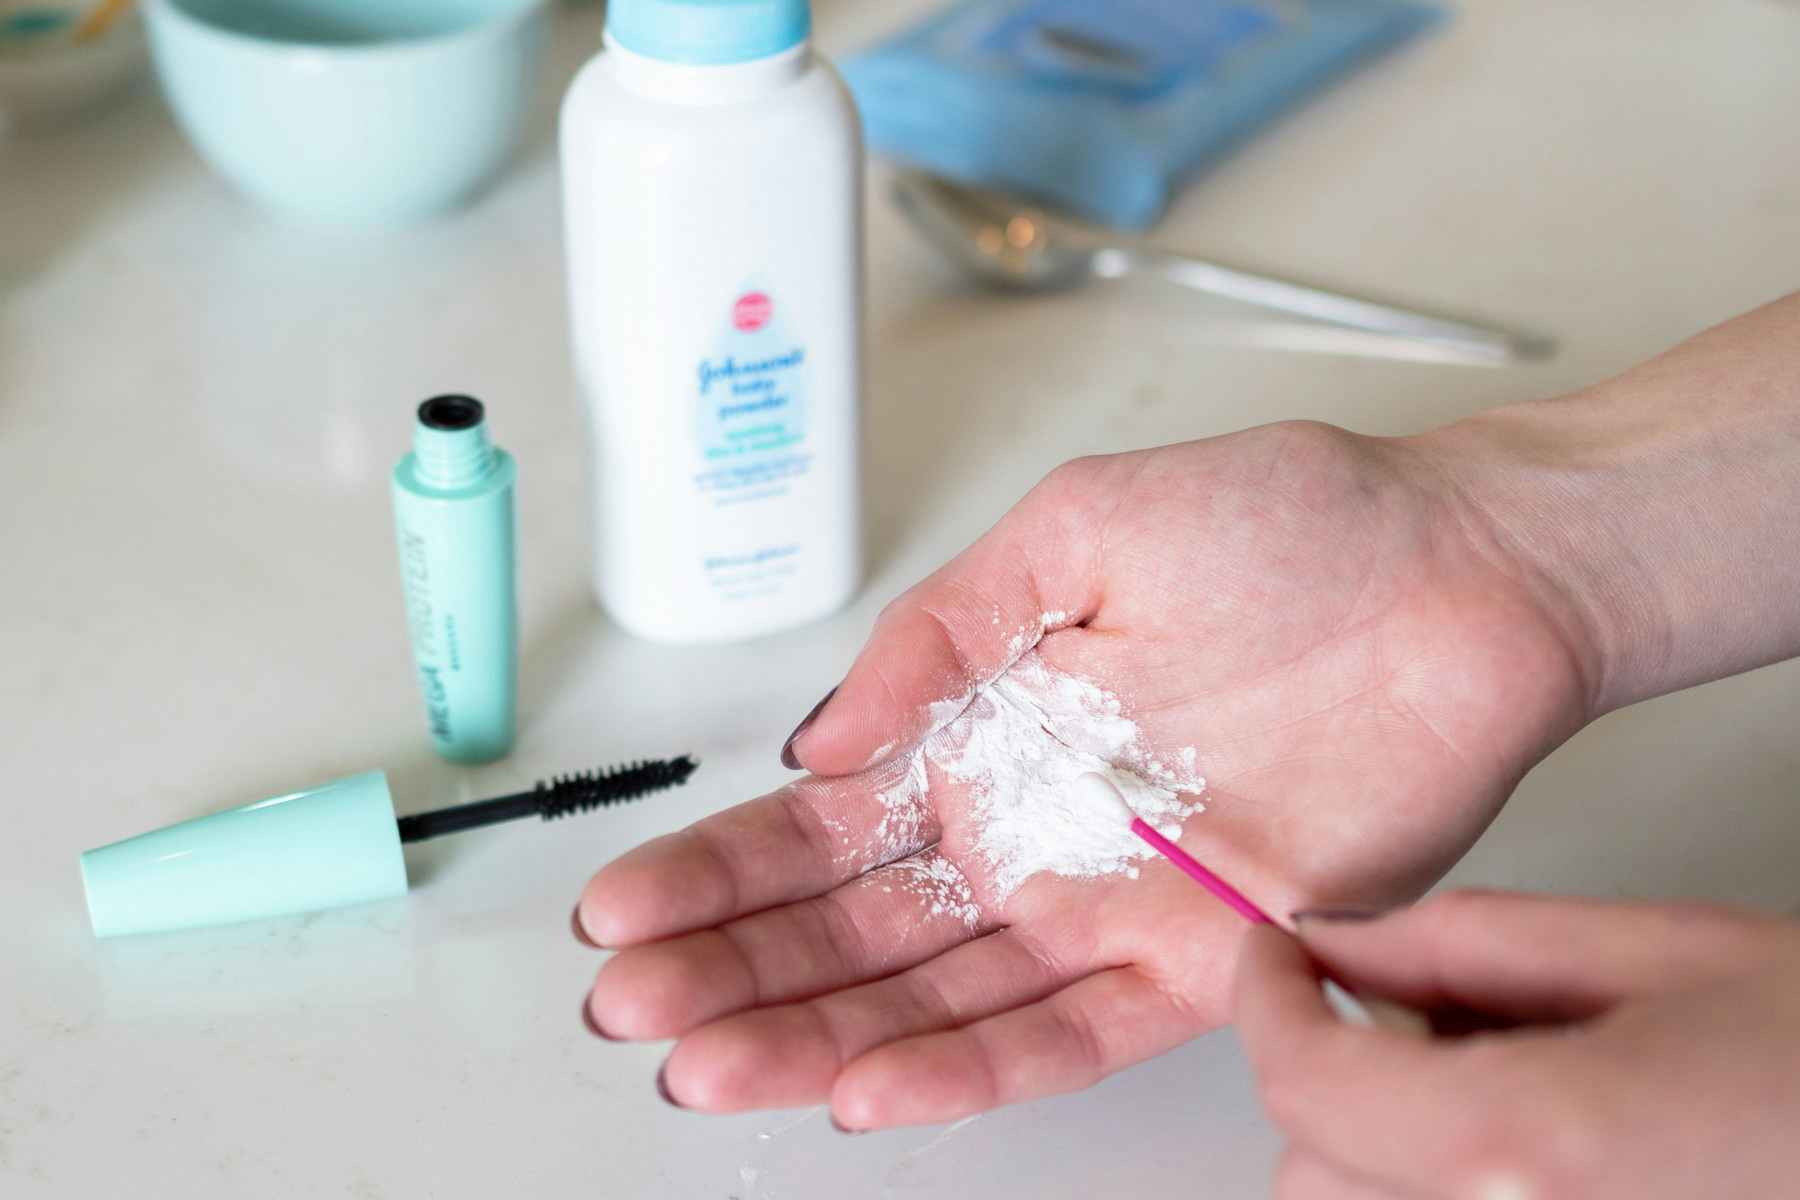 Here's a Cheap DIY Hard Water Remover - The Krazy Coupon Lady